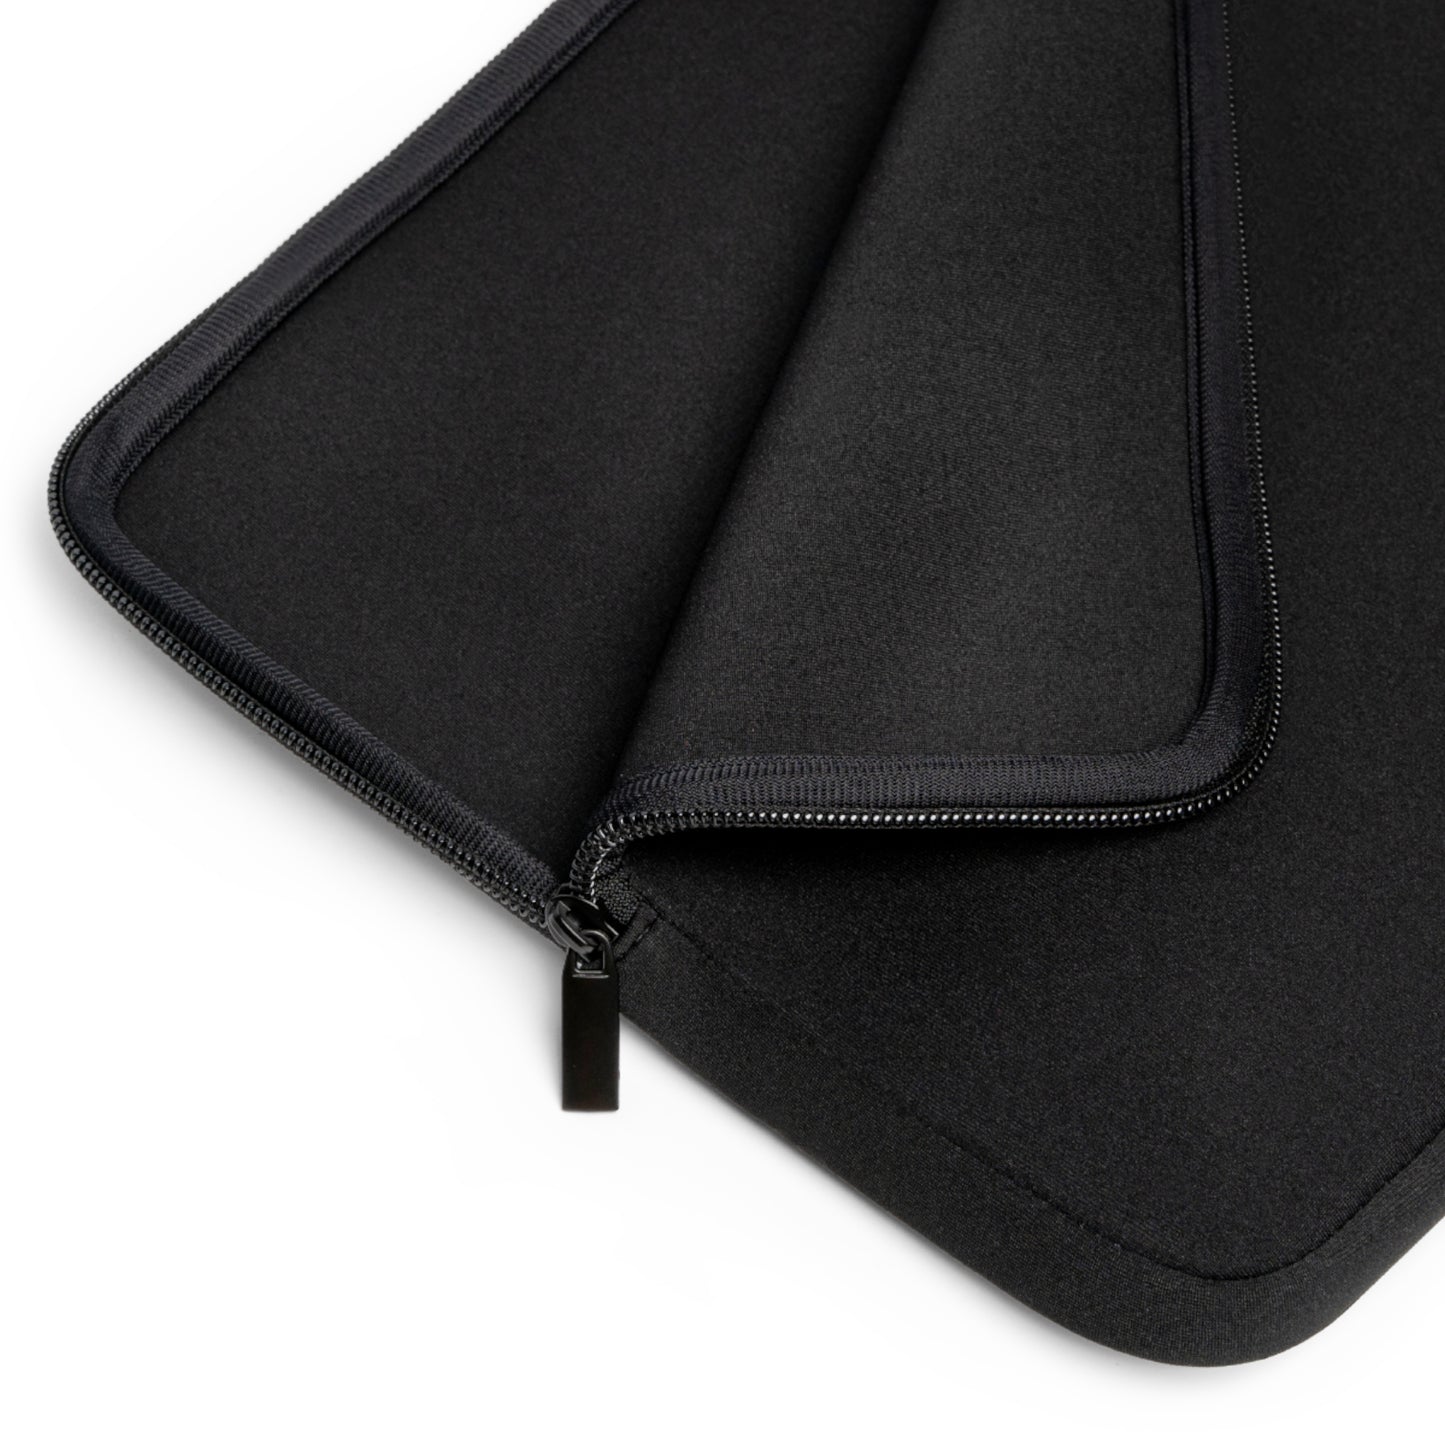 The Celsius Library Laptop Sleeve